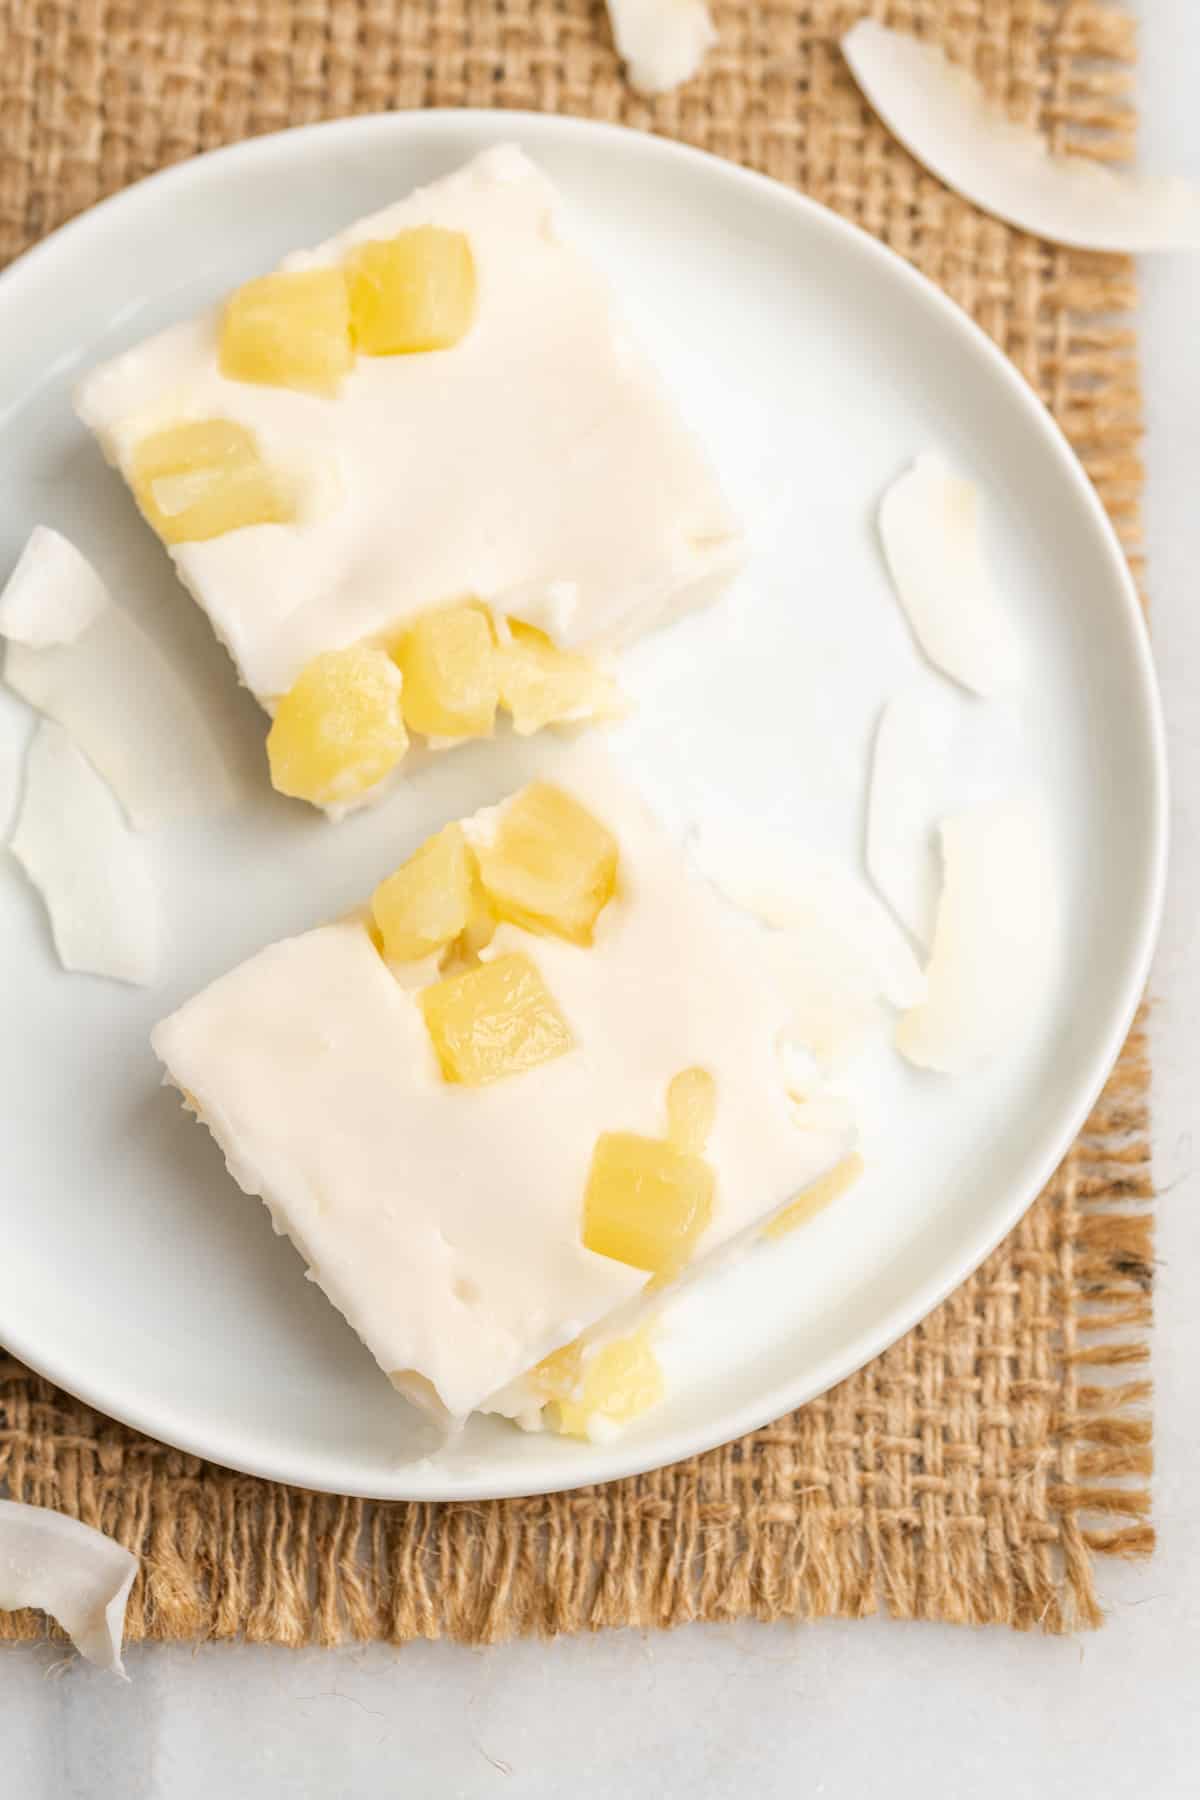 Two slices of pineapple haupia on white plate